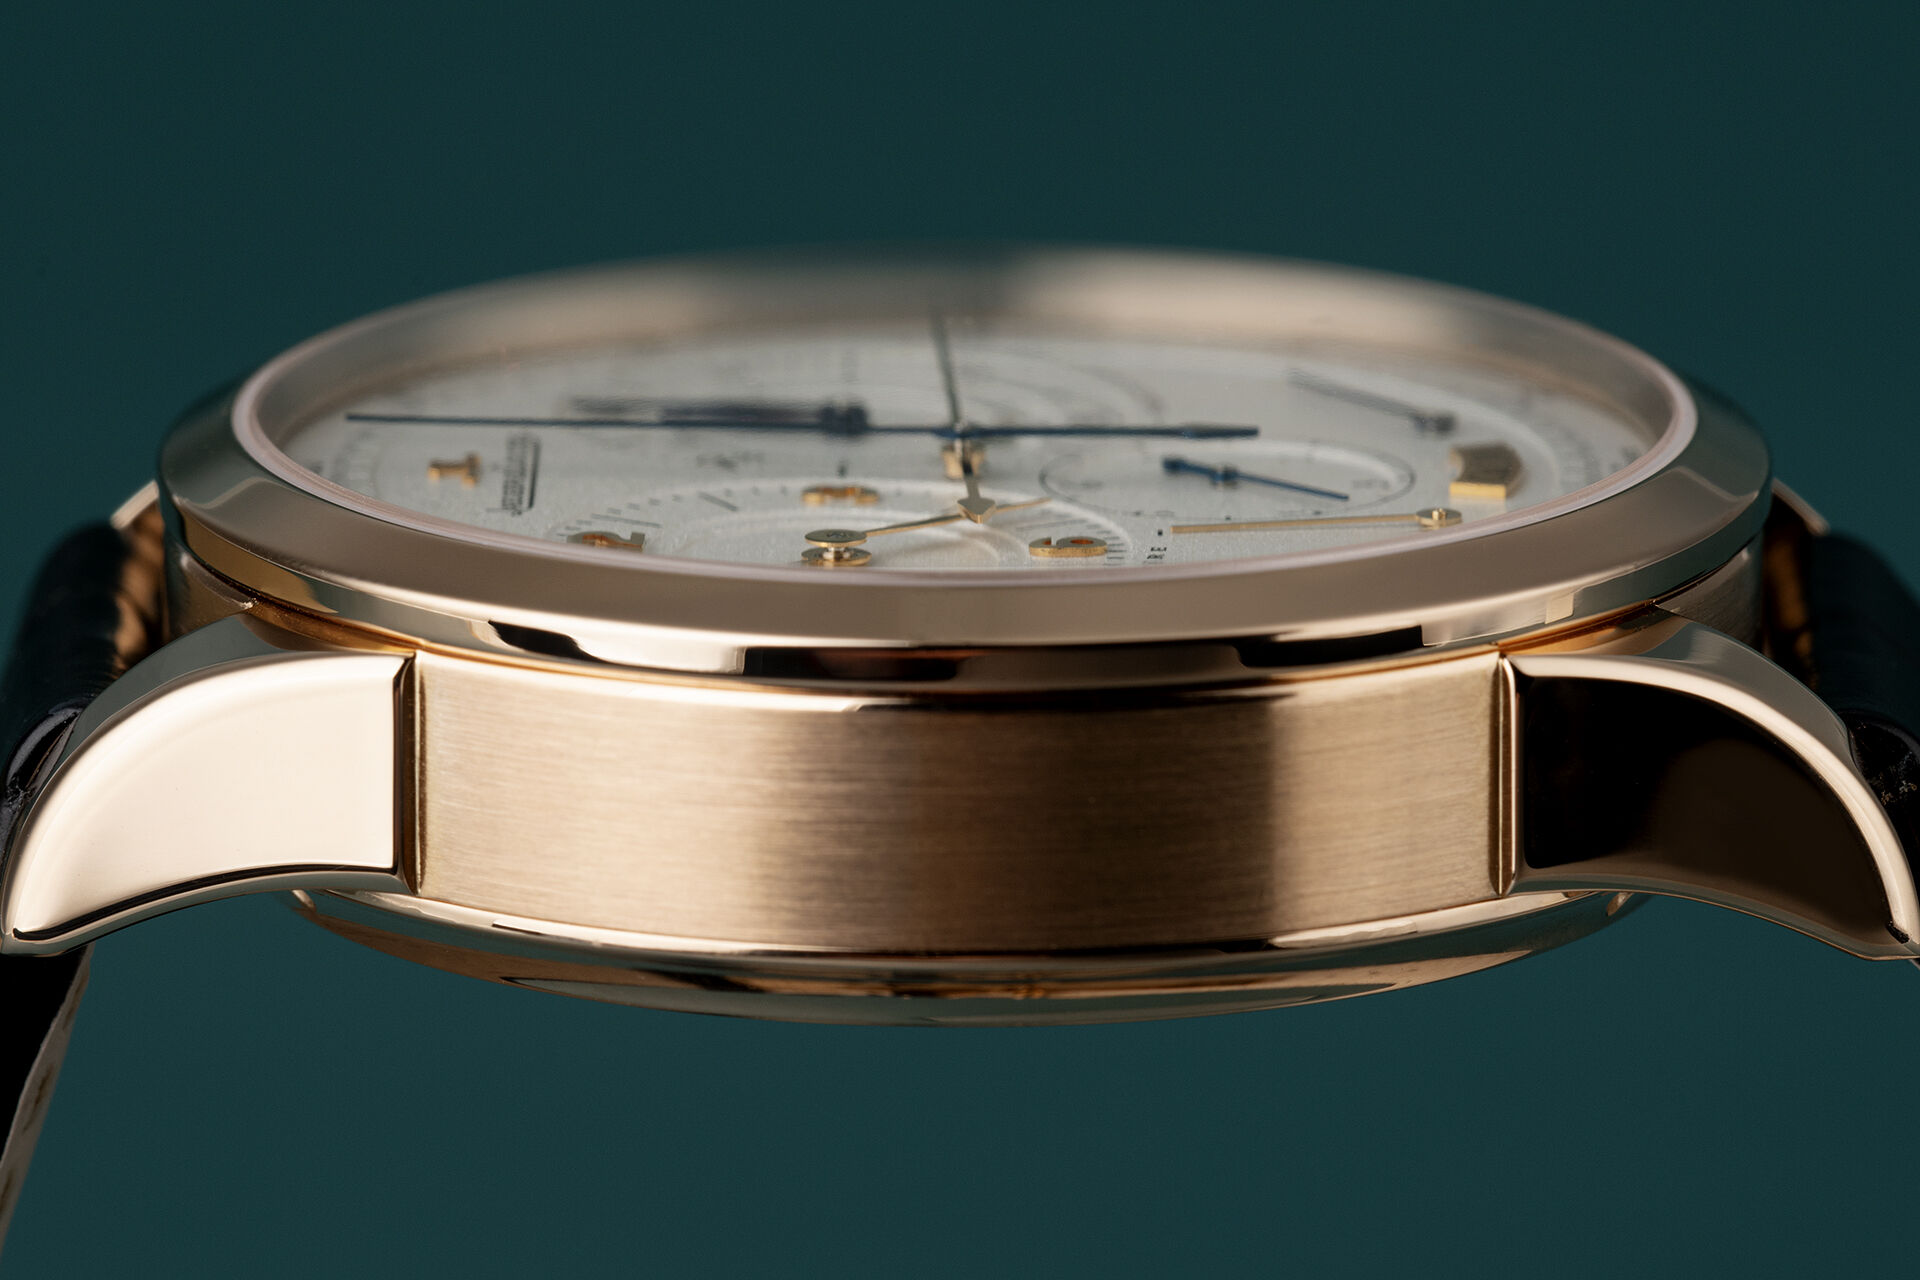 ref 600.2.28.S | Serviced by JLC | Jaeger-leCoultre Duometre